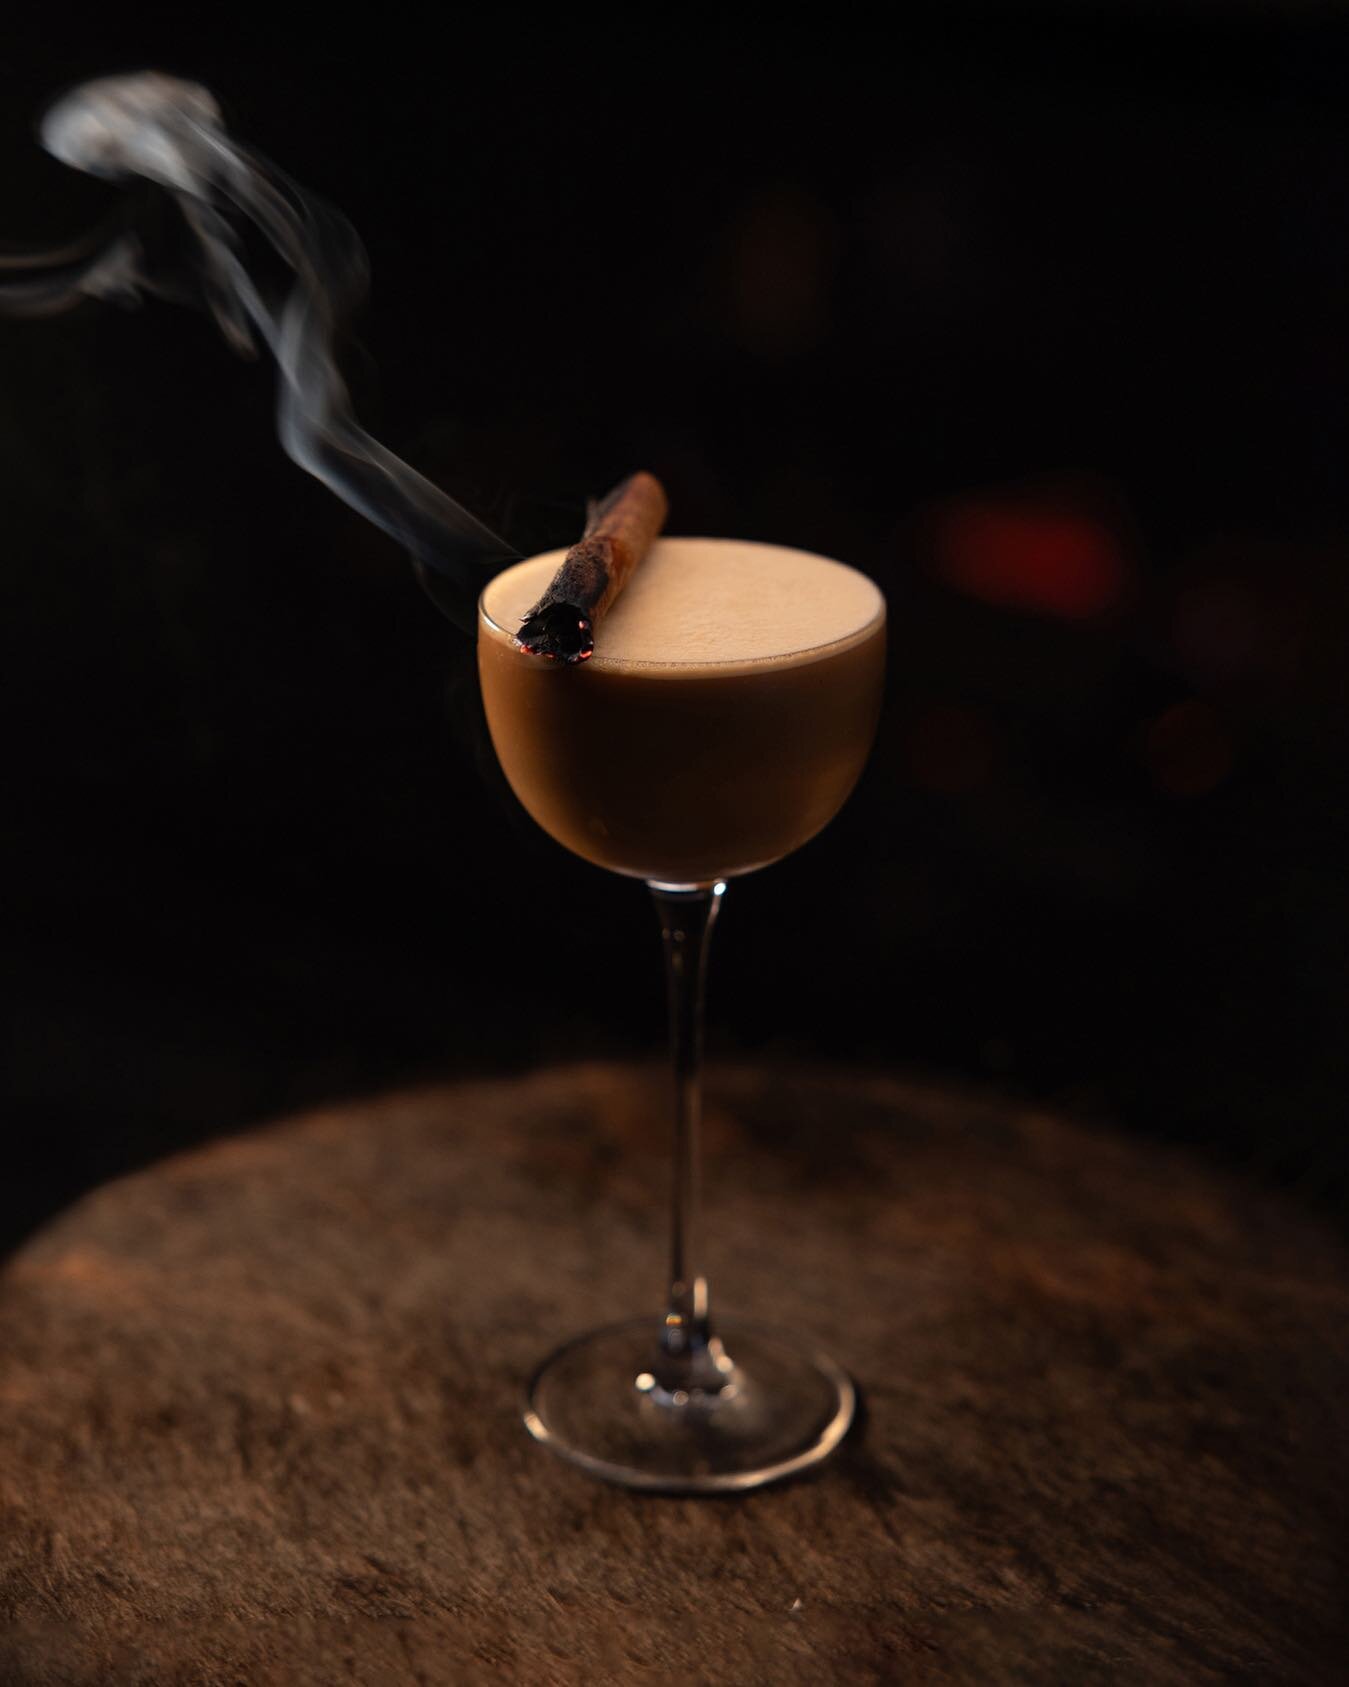 Harry&rsquo;s Vietnamese Espresso martini is calling your name. Come sip one by the open fireplace.